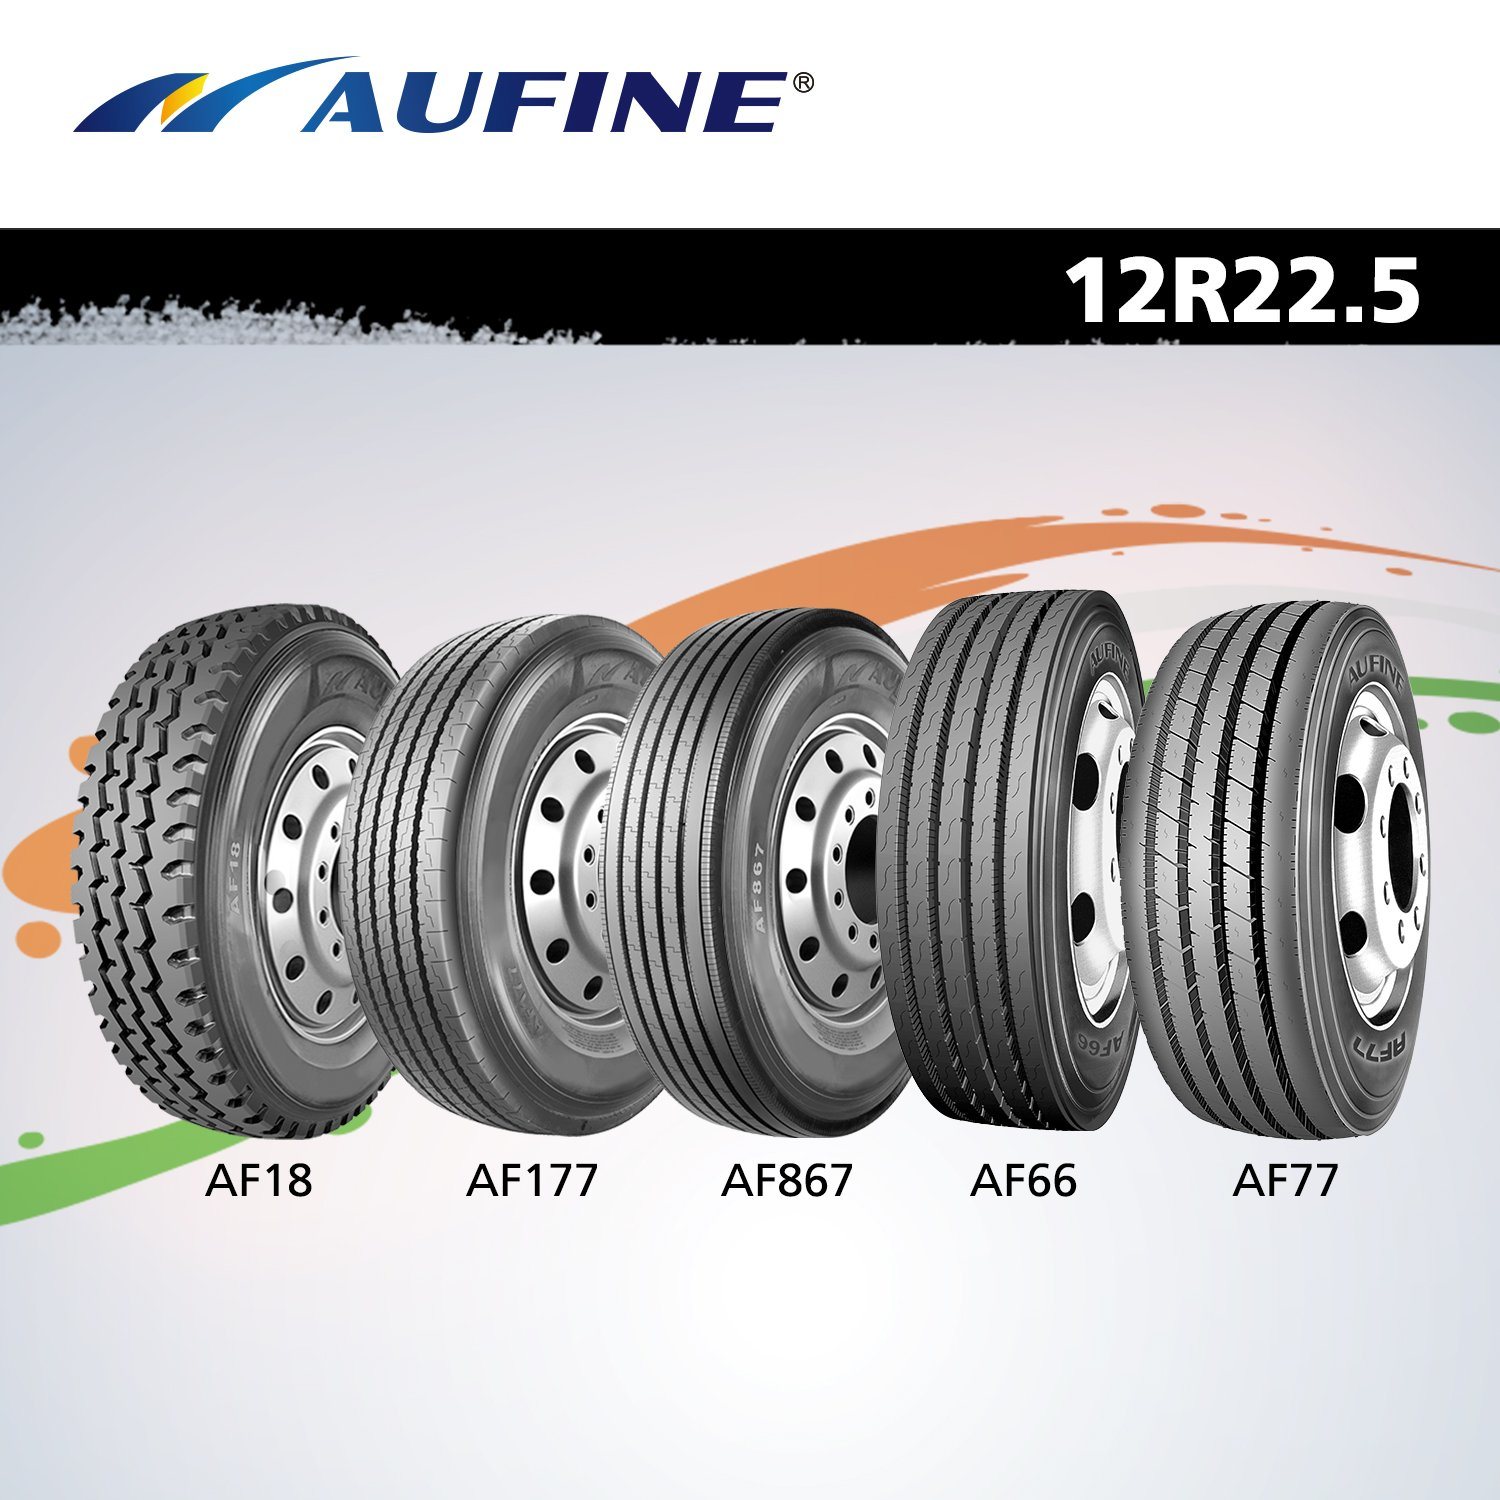 Alibaba Best Sellers for 11r22.5 315/80r22.5 385/65r22.5 295/80r22.5 295/75r22.5 Tire